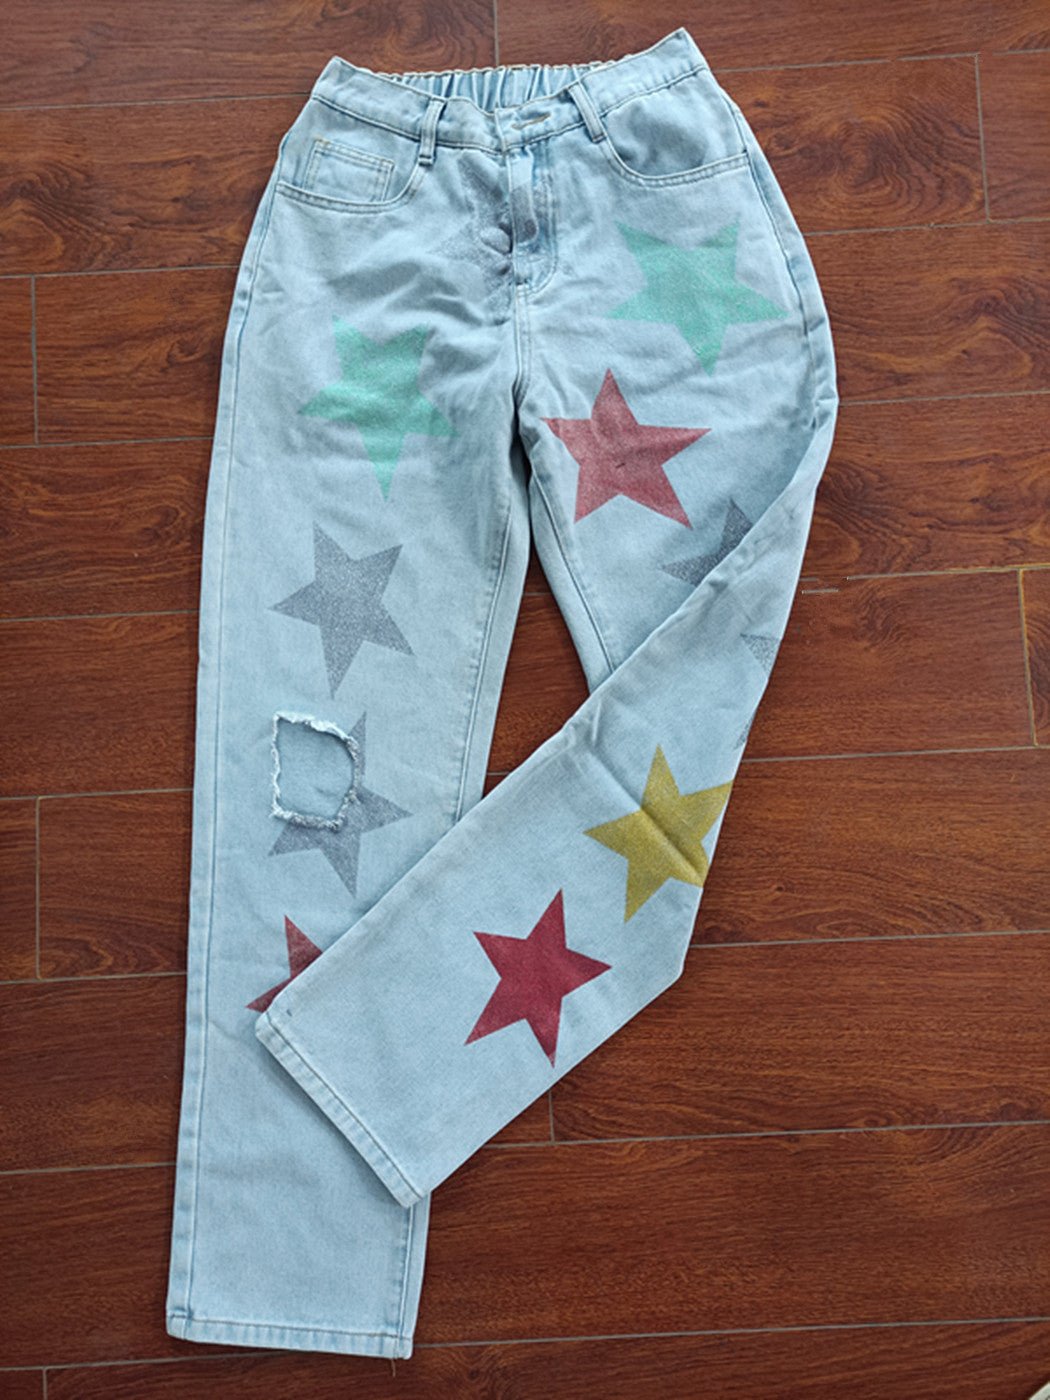 Sequined Star Ripped Jeans - Denim Trousers with Printed Stars - HalleBeauty